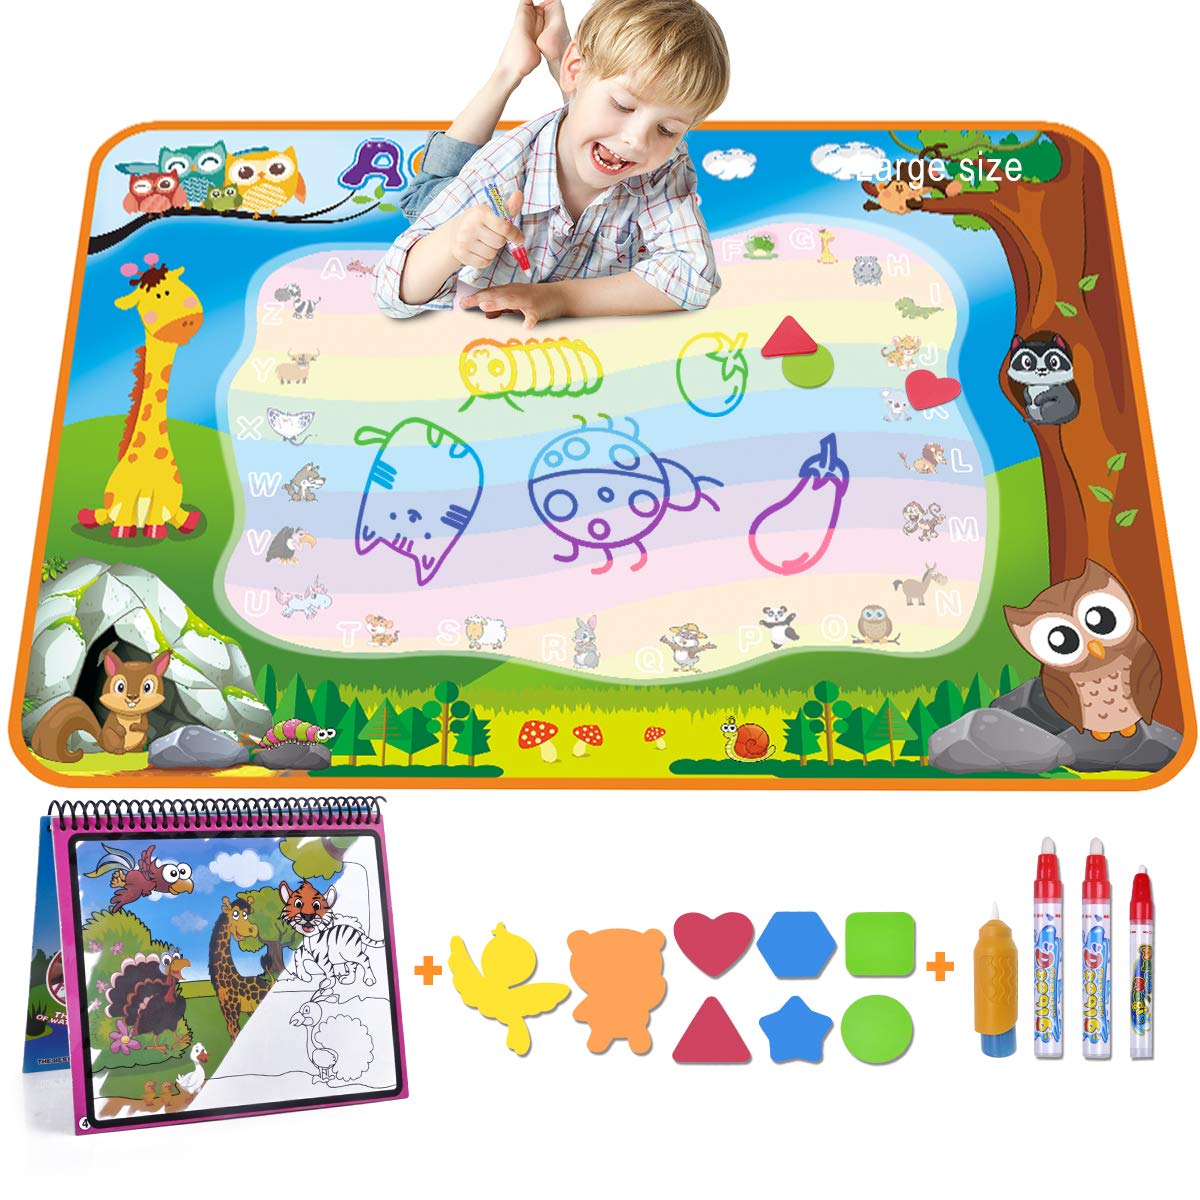 Aqua Magic Doodle Mat Large Water Drawing Mat for Kids Gifts Educational Toy Toddler Painting Board 